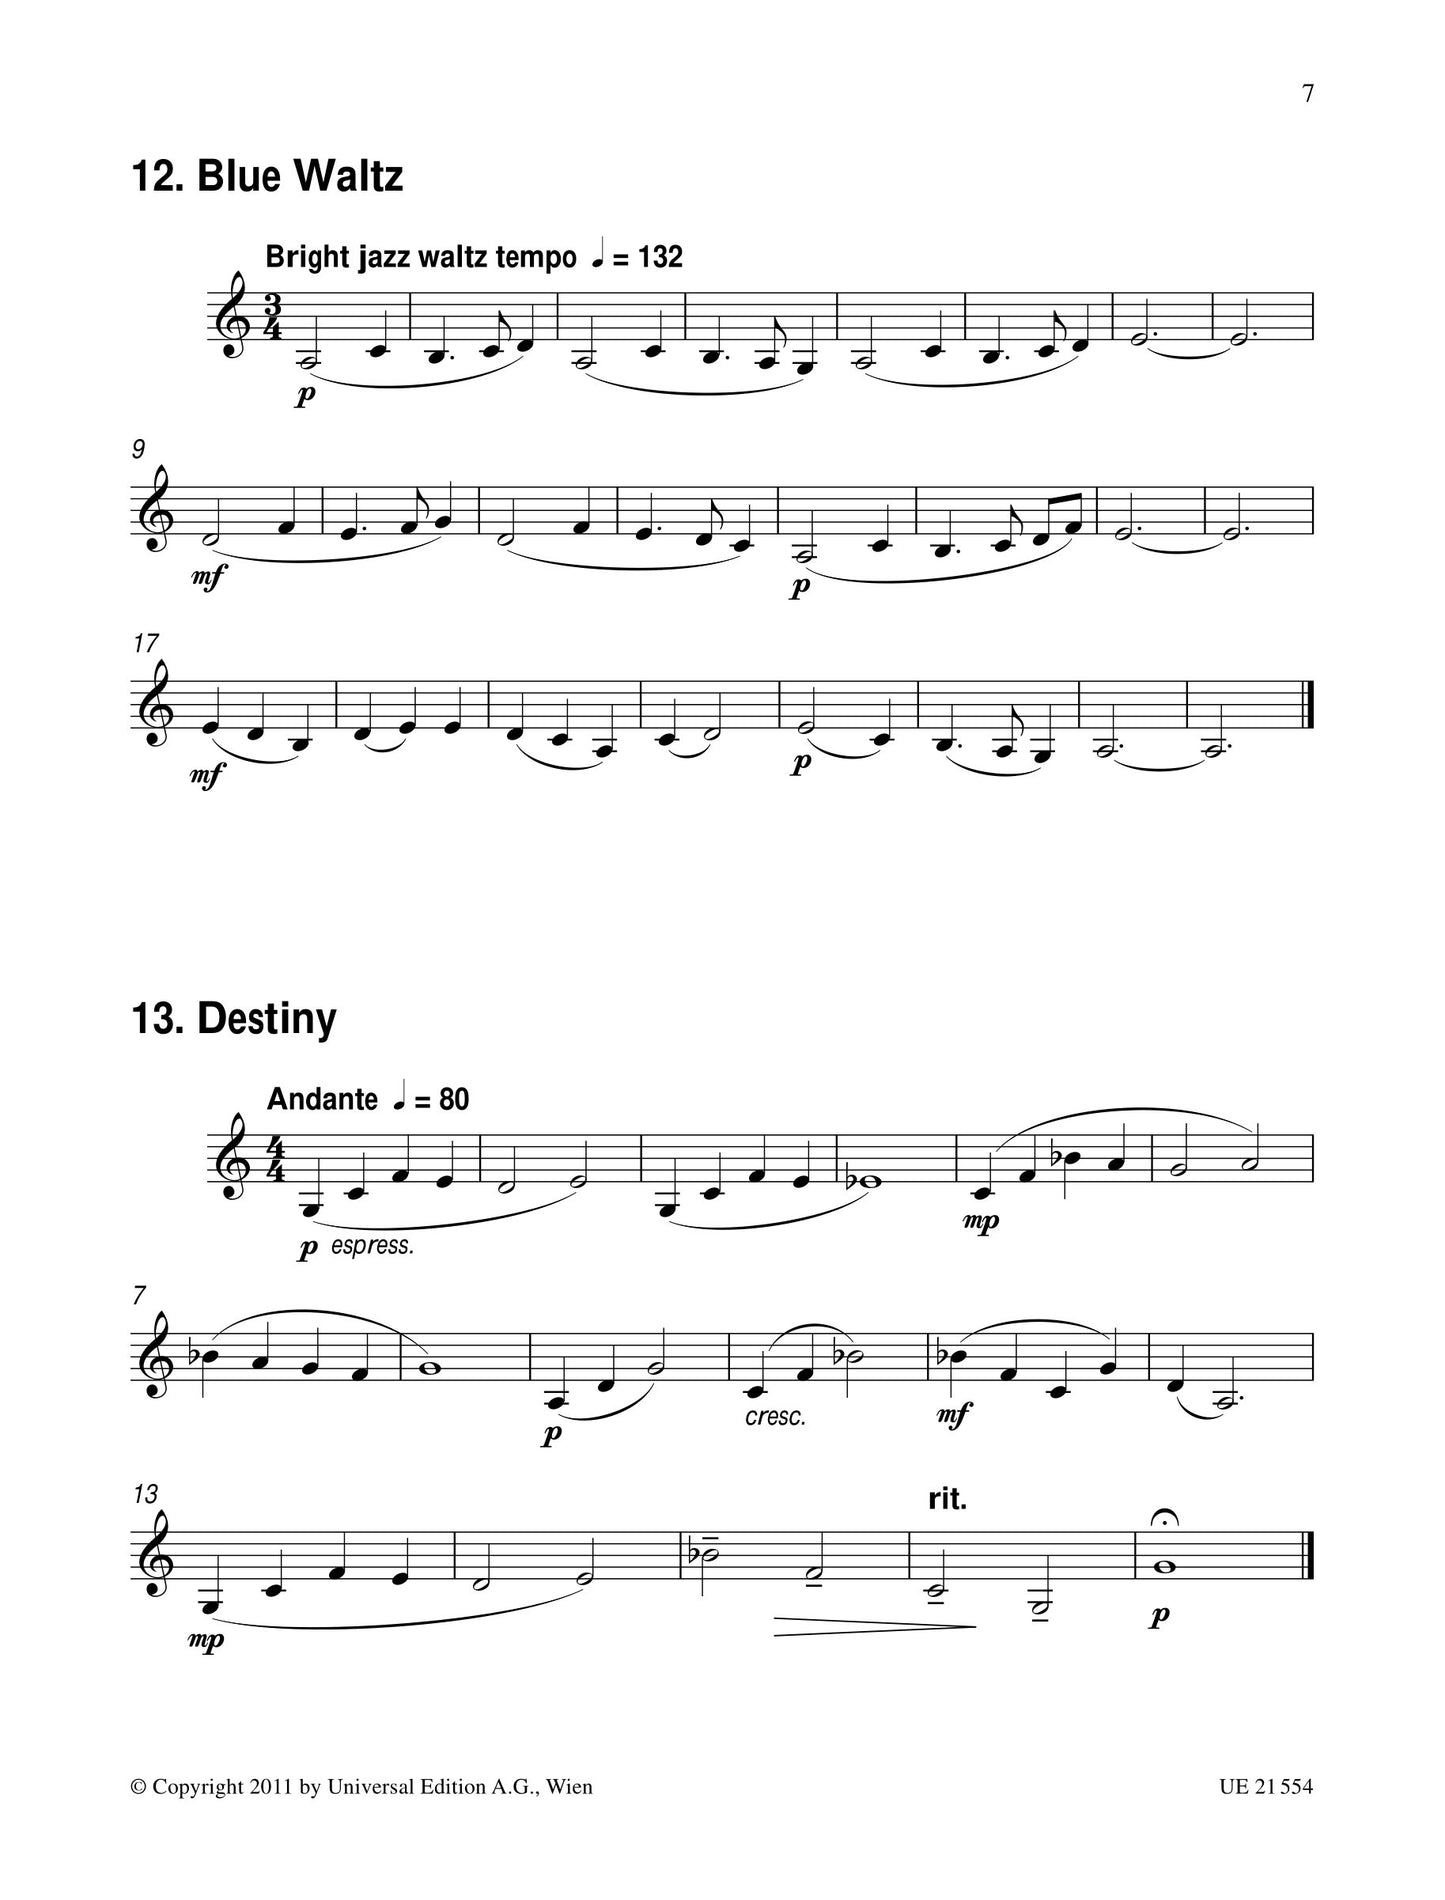 James Rae - 38 More Modern Studies For Solo Clarinet Book